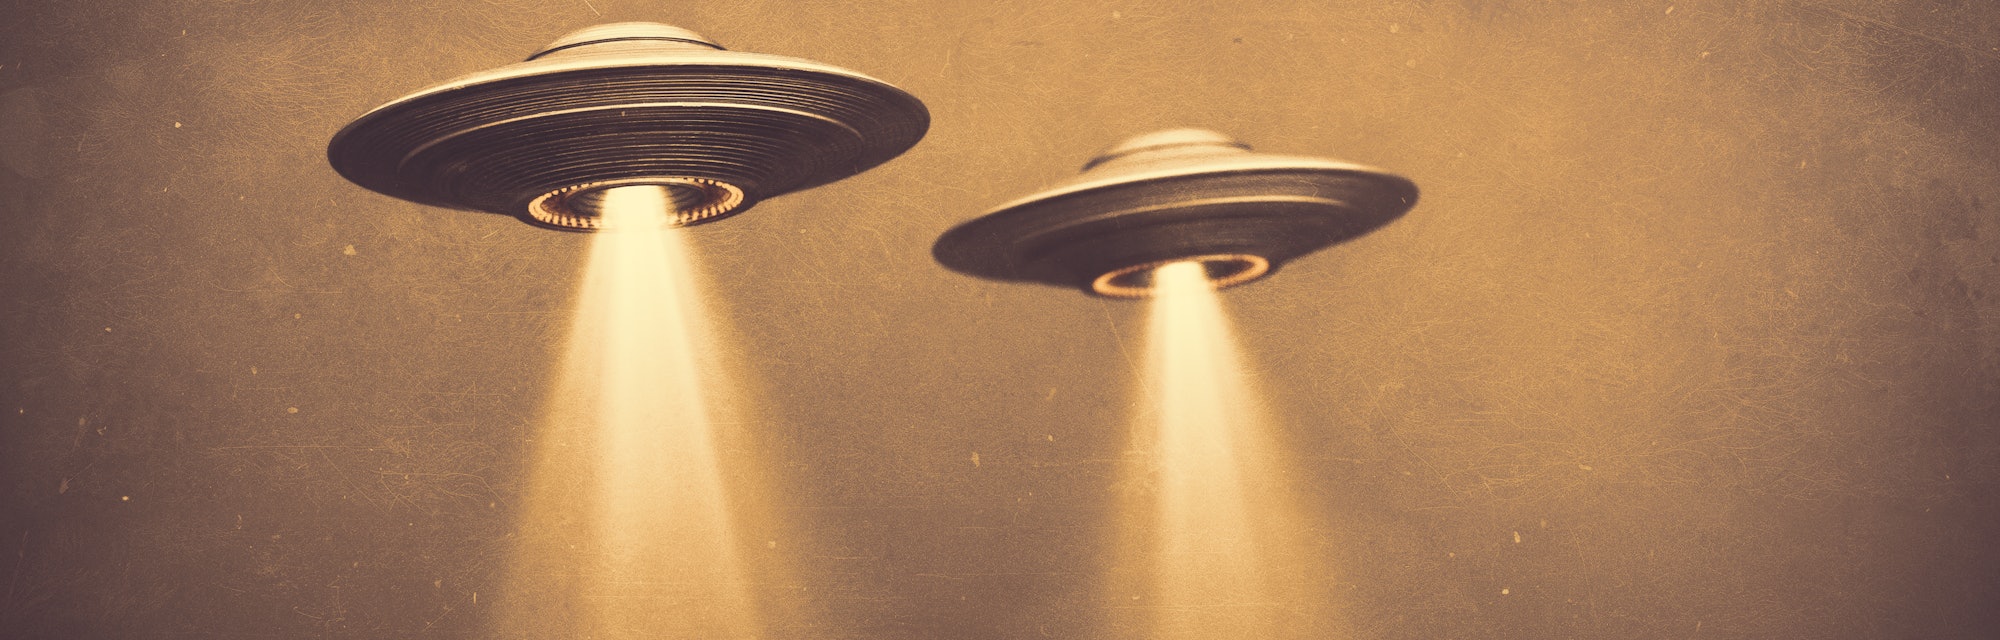 Two UFOs flying in fog with light below. 3D illustration monochromatic sepia-toned old-time photogra...